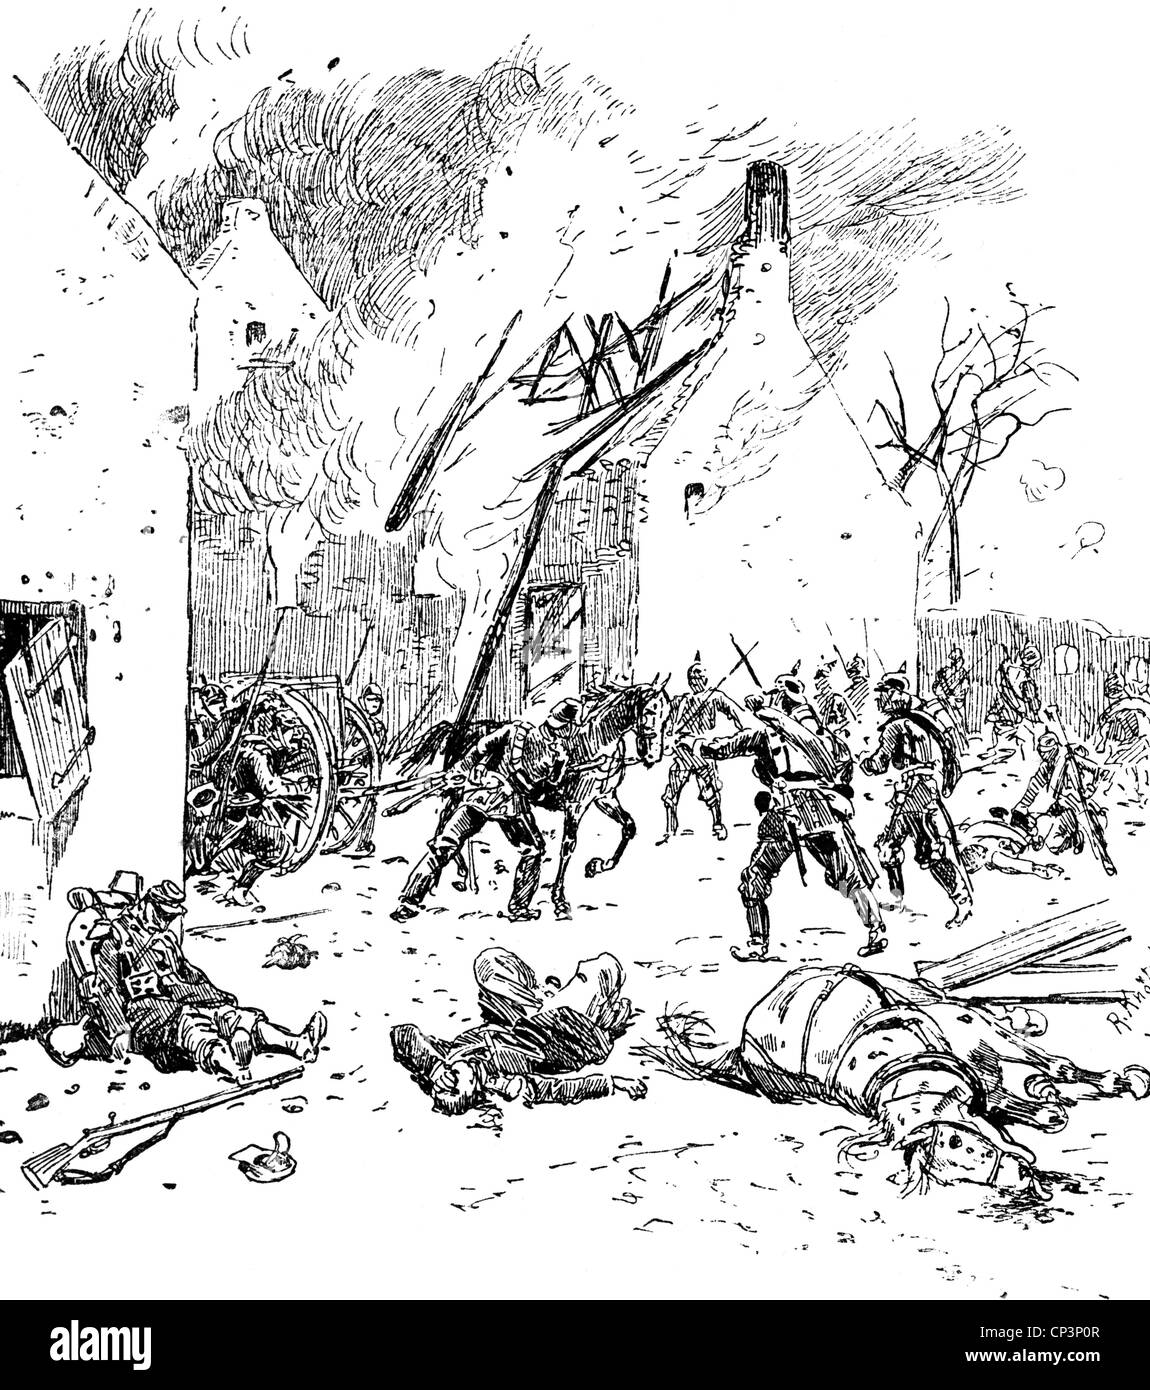 events, Franco-Prussian War 1870 - 1871, Battle of Villejouan, 10.12.1870, the 33rd (Hanseatic) Brigade involved in street fighting, wood engraving, 19th century, German infantry, soldiers, winter, Germany, France, Franco - Prussian, historic, historical, people, Additional-Rights-Clearences-Not Available Stock Photo